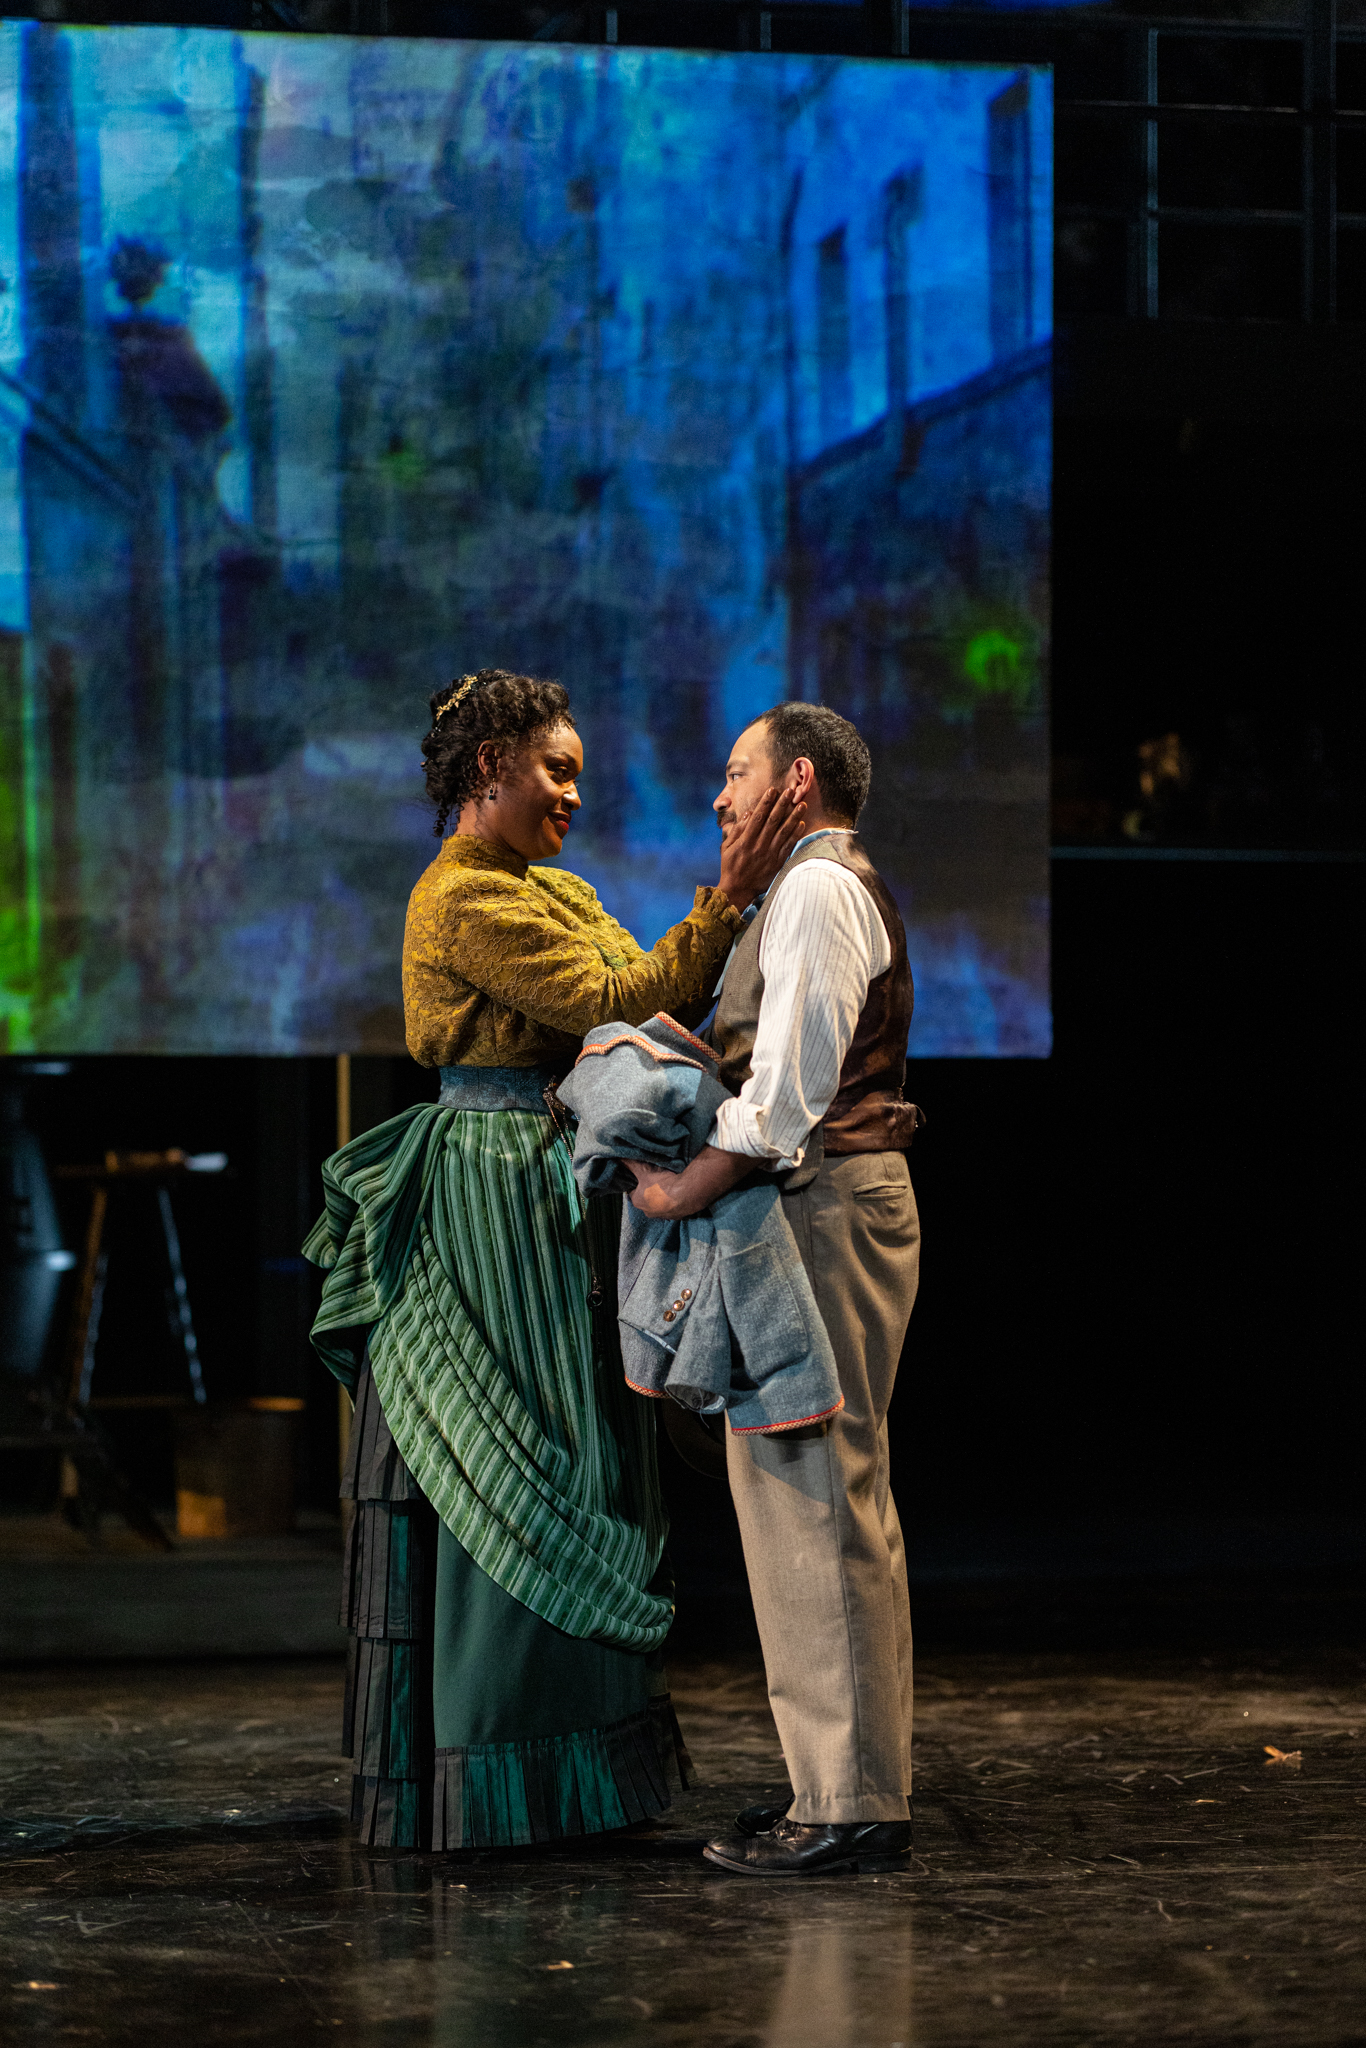 Deidrie Henry as “Agostina” and Paco Tolson as “Vincent” in La Jolla Playhouse’s world-premiere production of TO THE YELLOW HOUSE, by Kimber Lee, directed by Neel Keller; photo by Rich Soublet II.